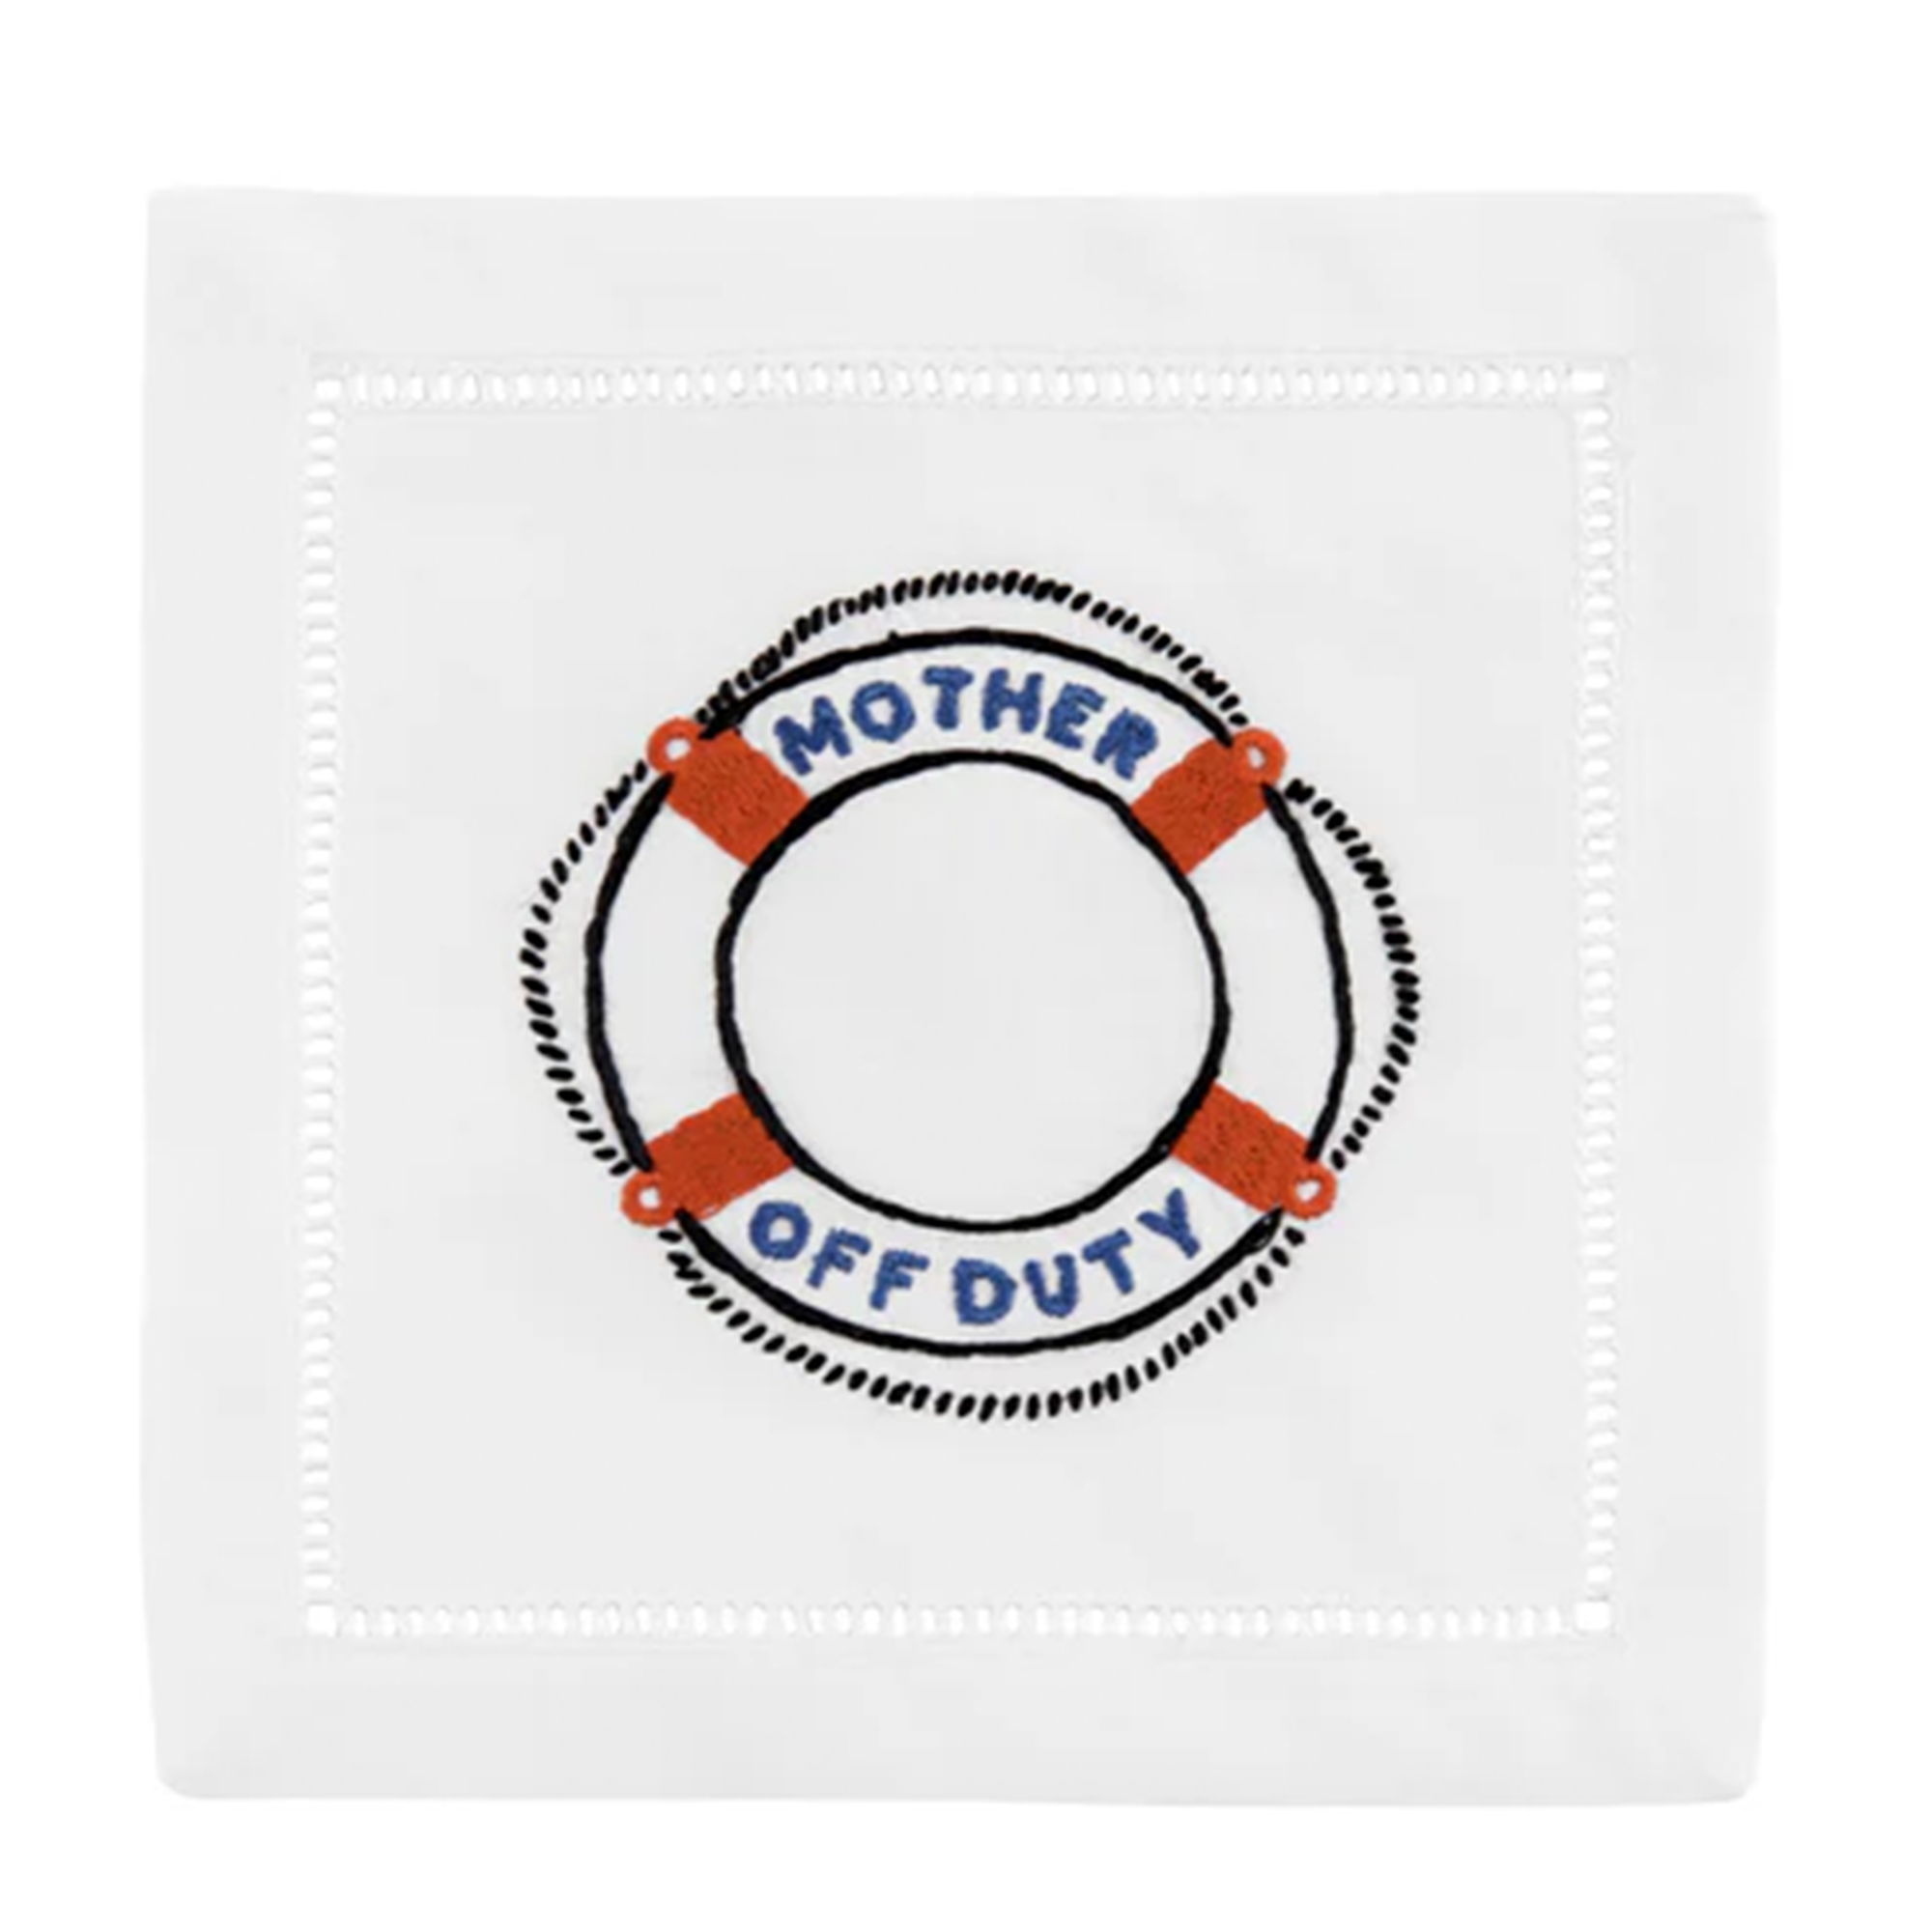 An illustration of a lifesaver float with the text 'Mother Off Duty' written on it. This humorous design on the cocktail napkin evokes the carefree spirit of a relaxing day by the water.